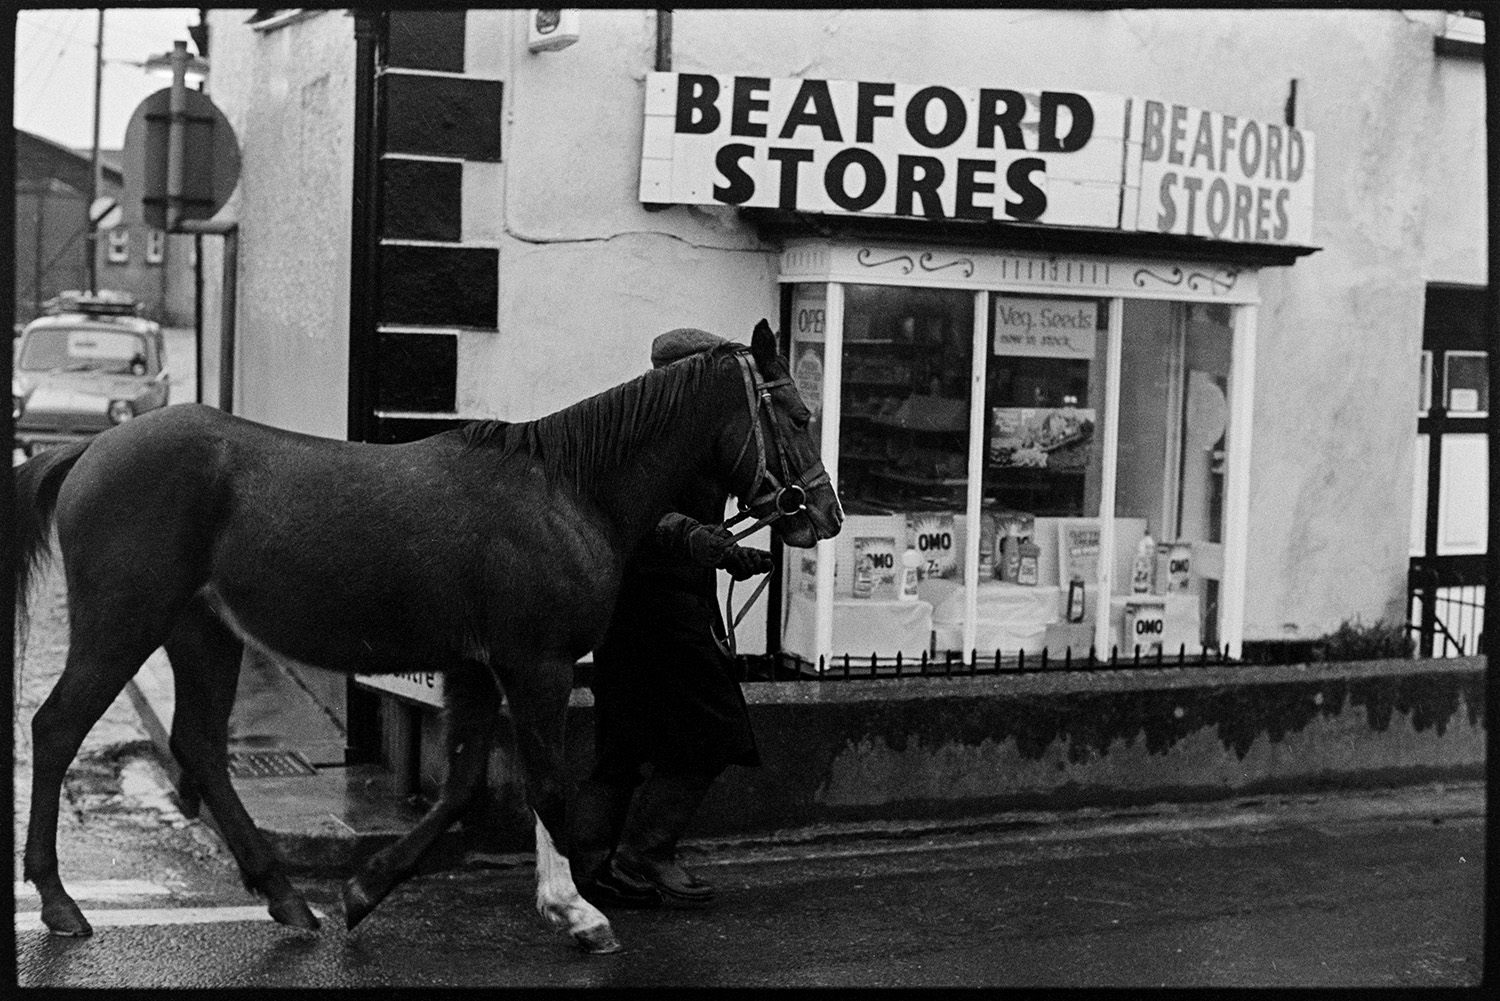 Man training young horse and getting it used to traffic. Going past shop.
[Henry Bright training a young horse and getting it used to traffic. They are passing the shop front of Beaford Stores in Beaford.]